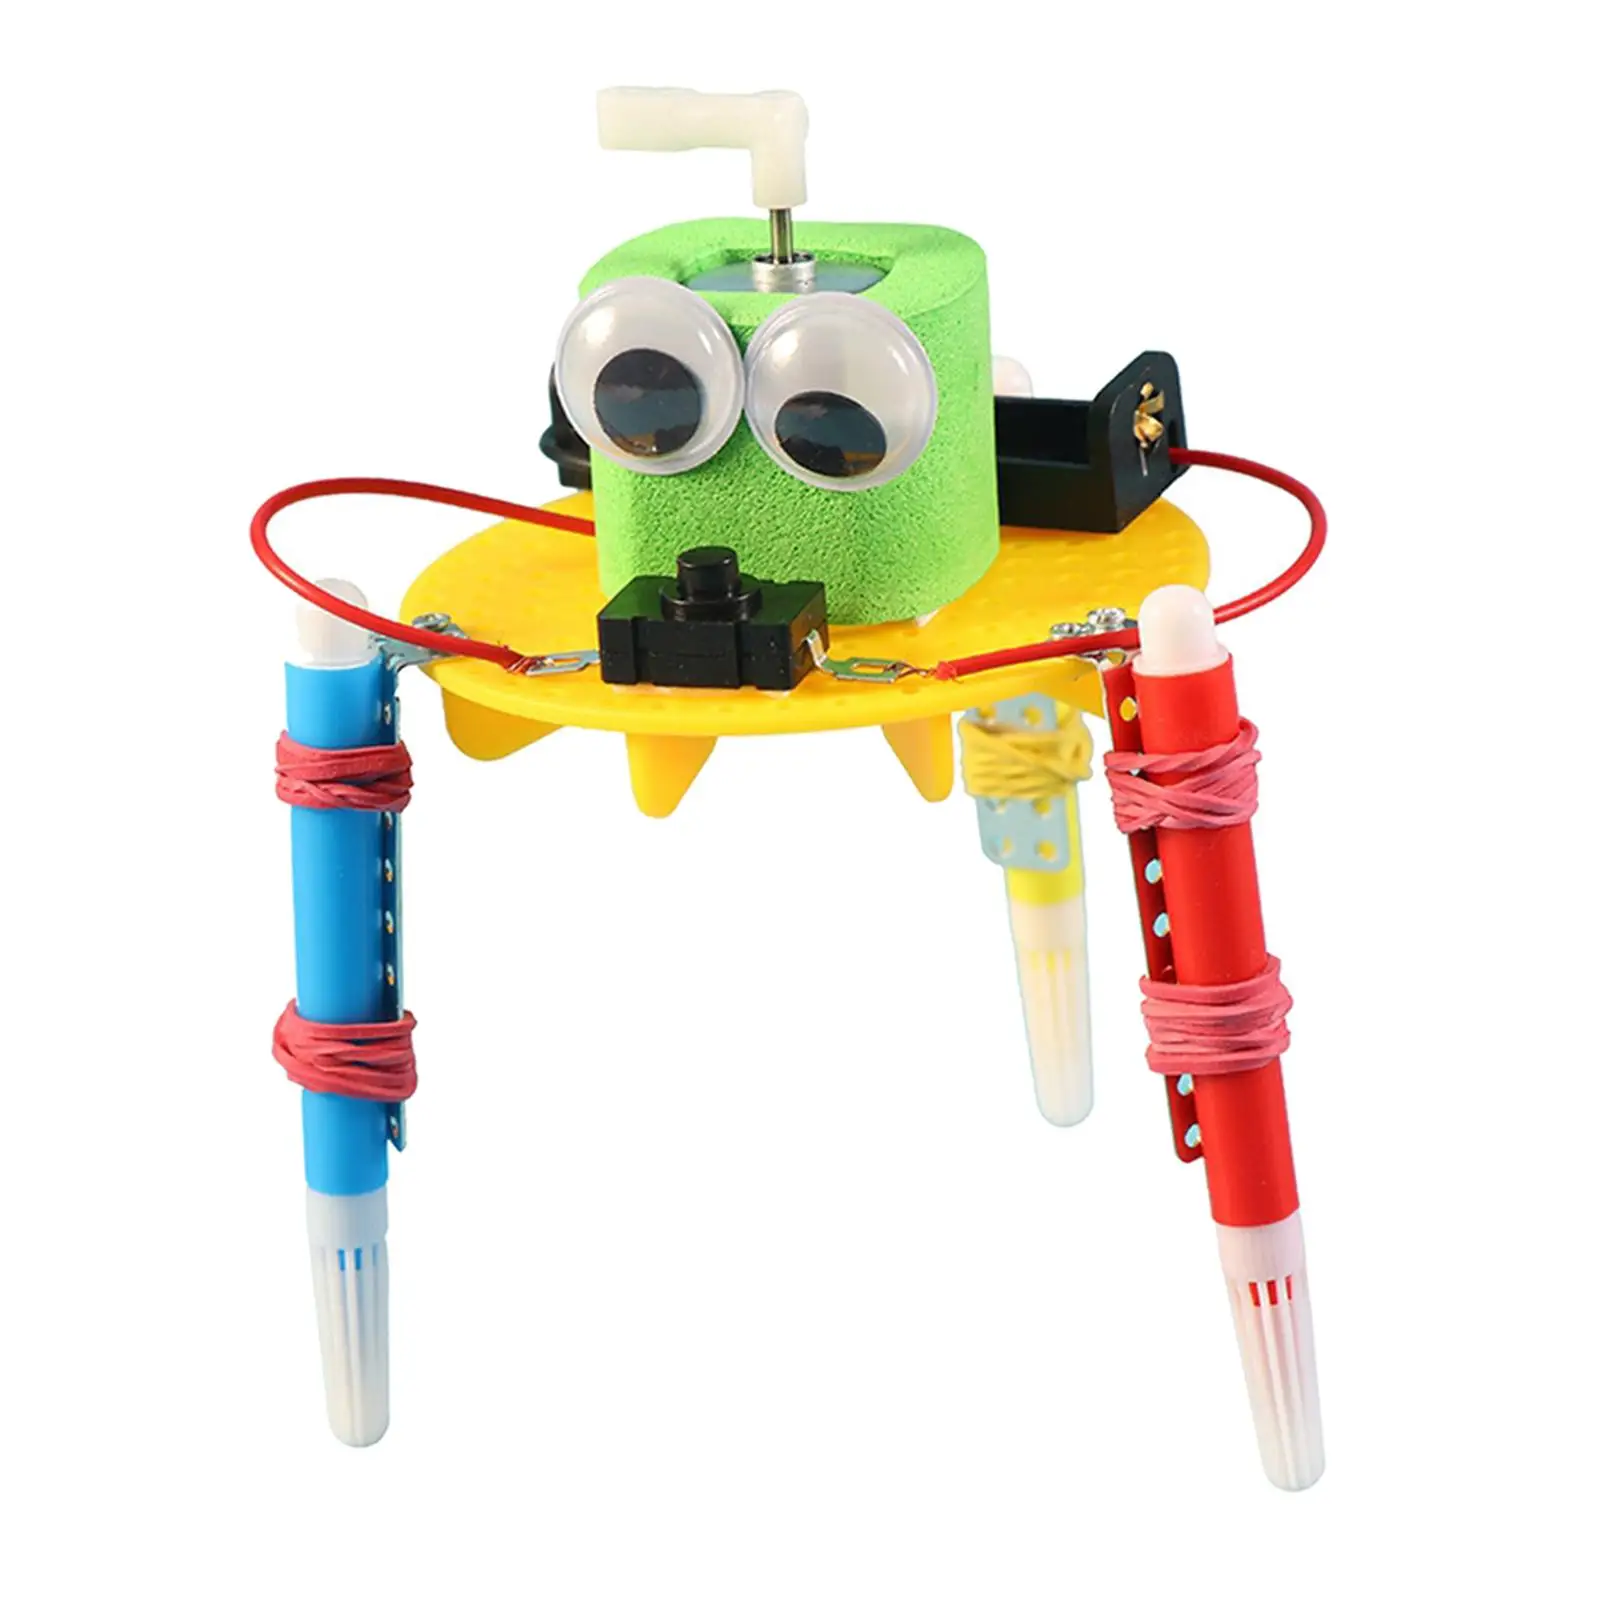 Early Learning DIY Doodle Robot Technology 3D Puzzle Model Experiment Toy Wooden science Kit for Girls Boys teens Gifts